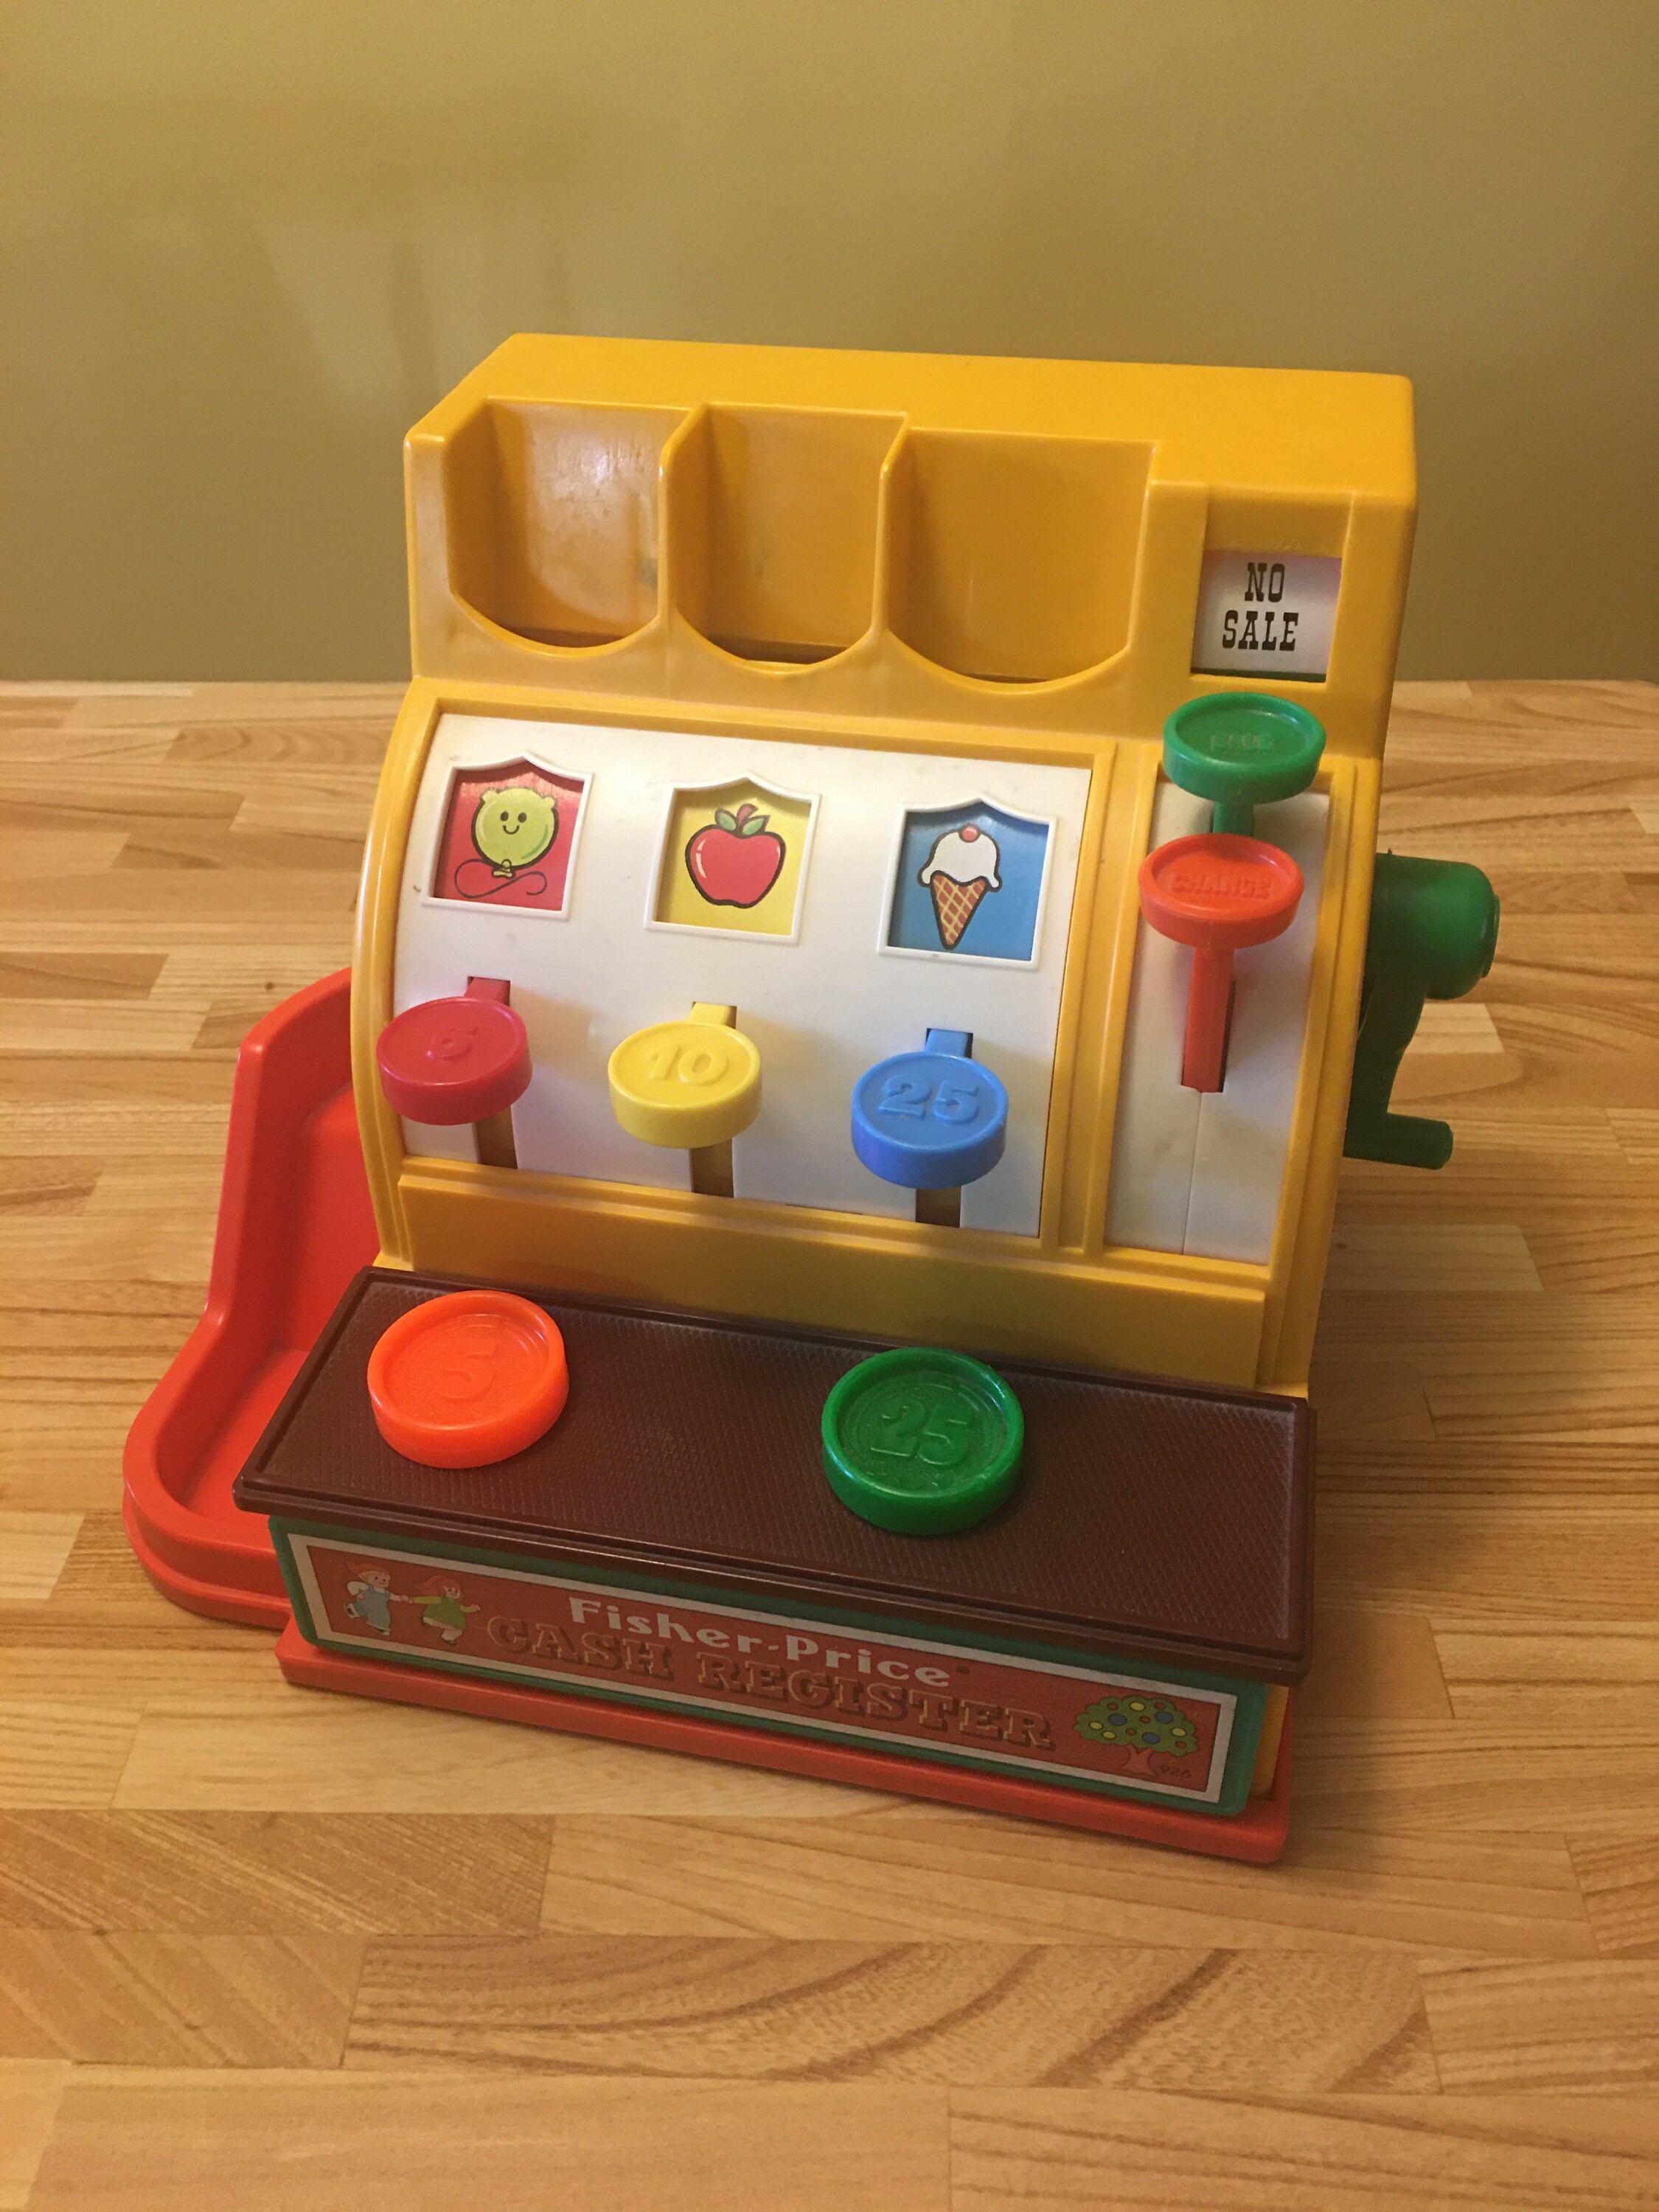 Vintage Fisher Price Cash Register With Coins 2 - Etsy